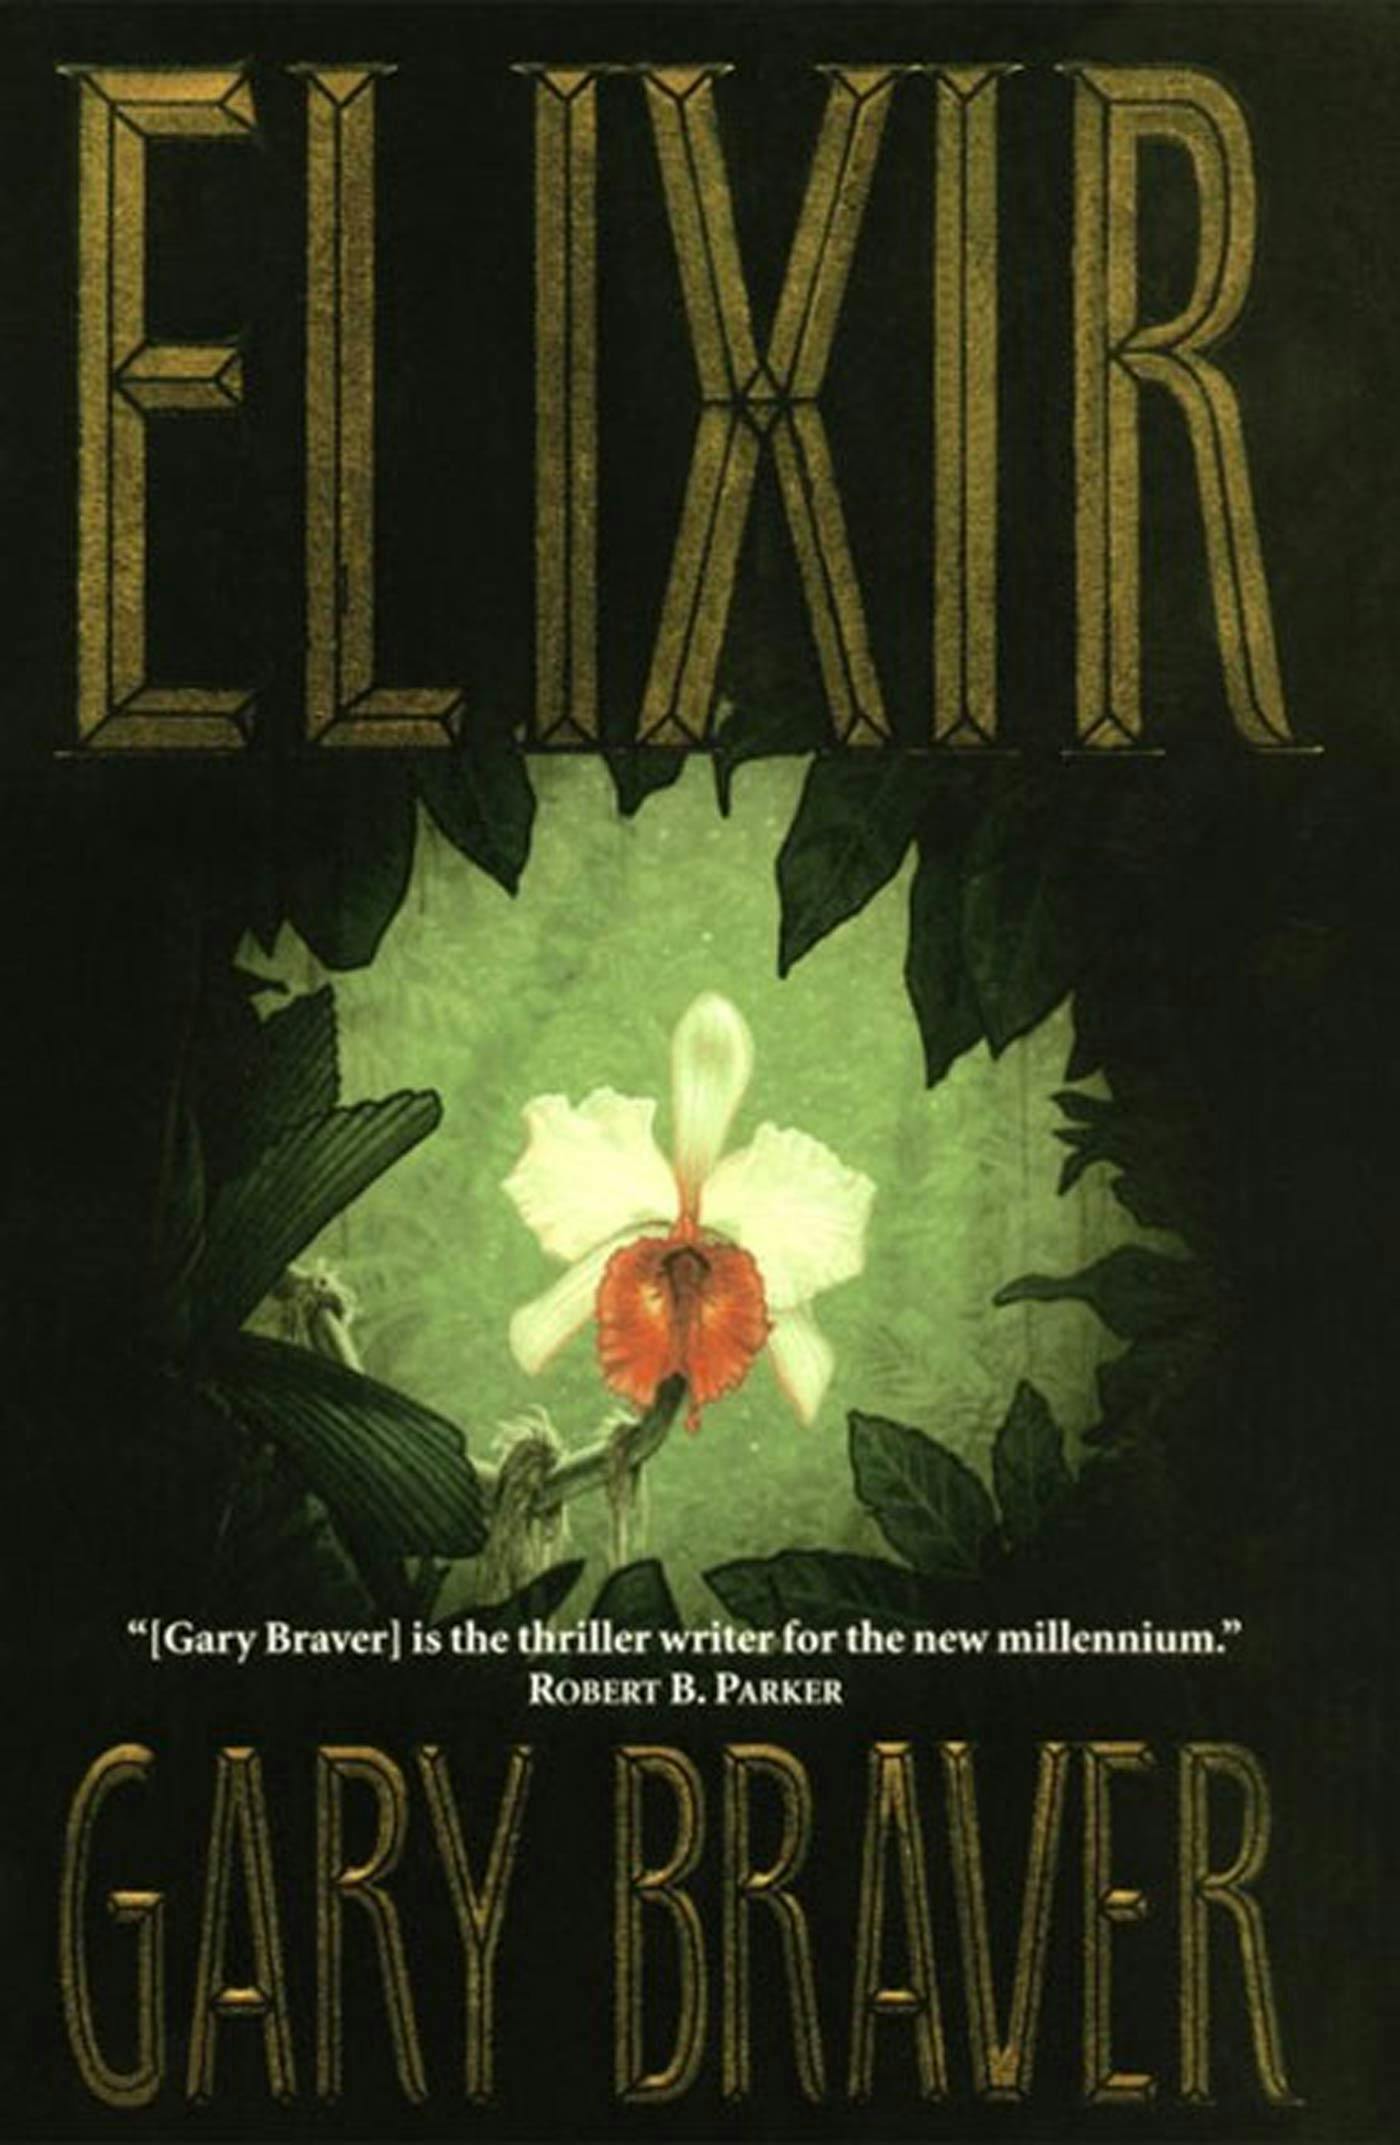 Cover for the book titled as: Elixir